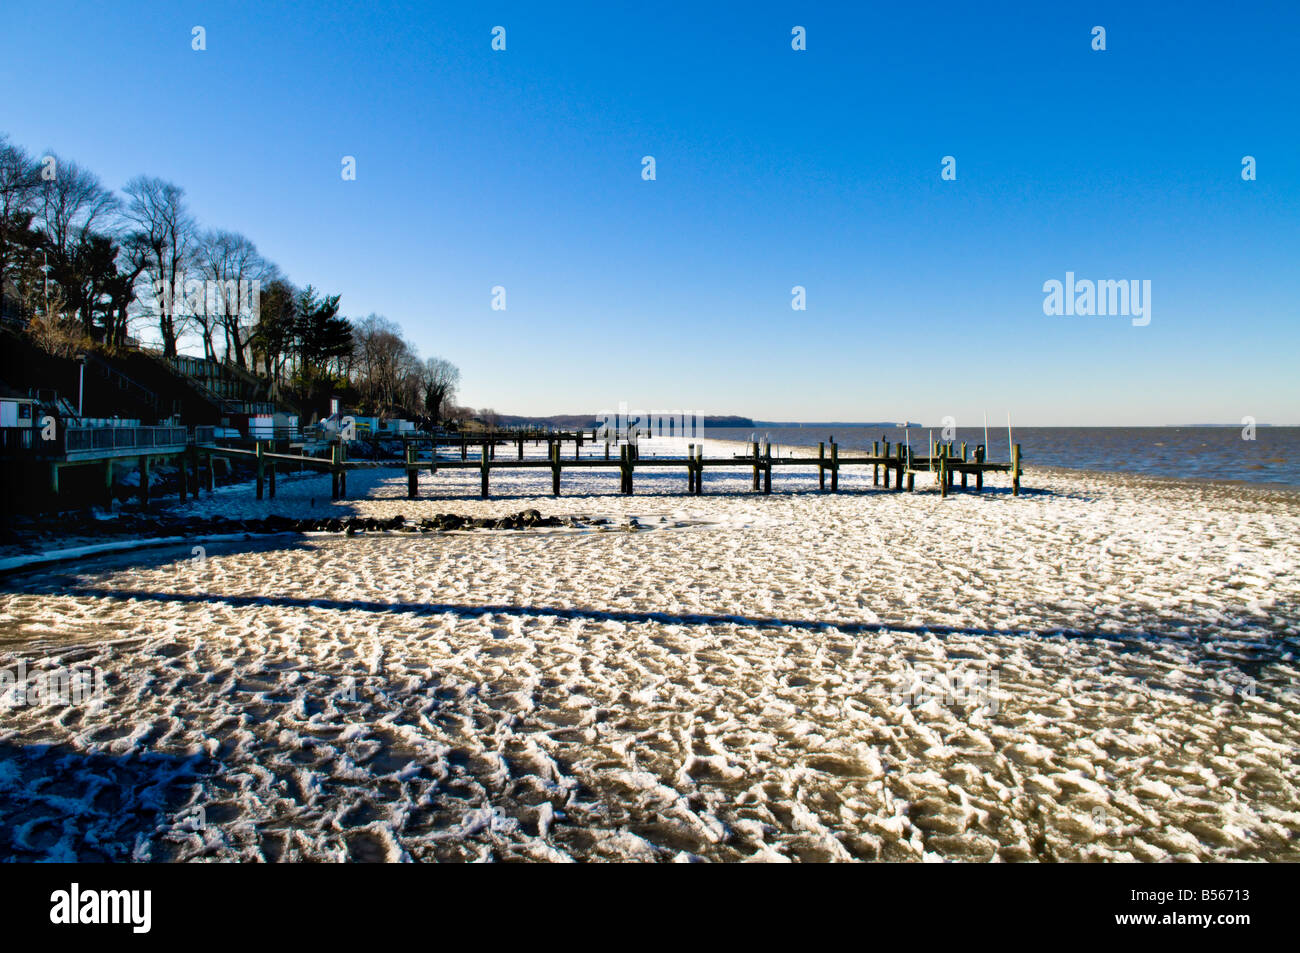 Overlooking a few dock and piers of the upper Chesapeake Bay.  Freezing temperatures set in overnight forming ice in the water. Stock Photo